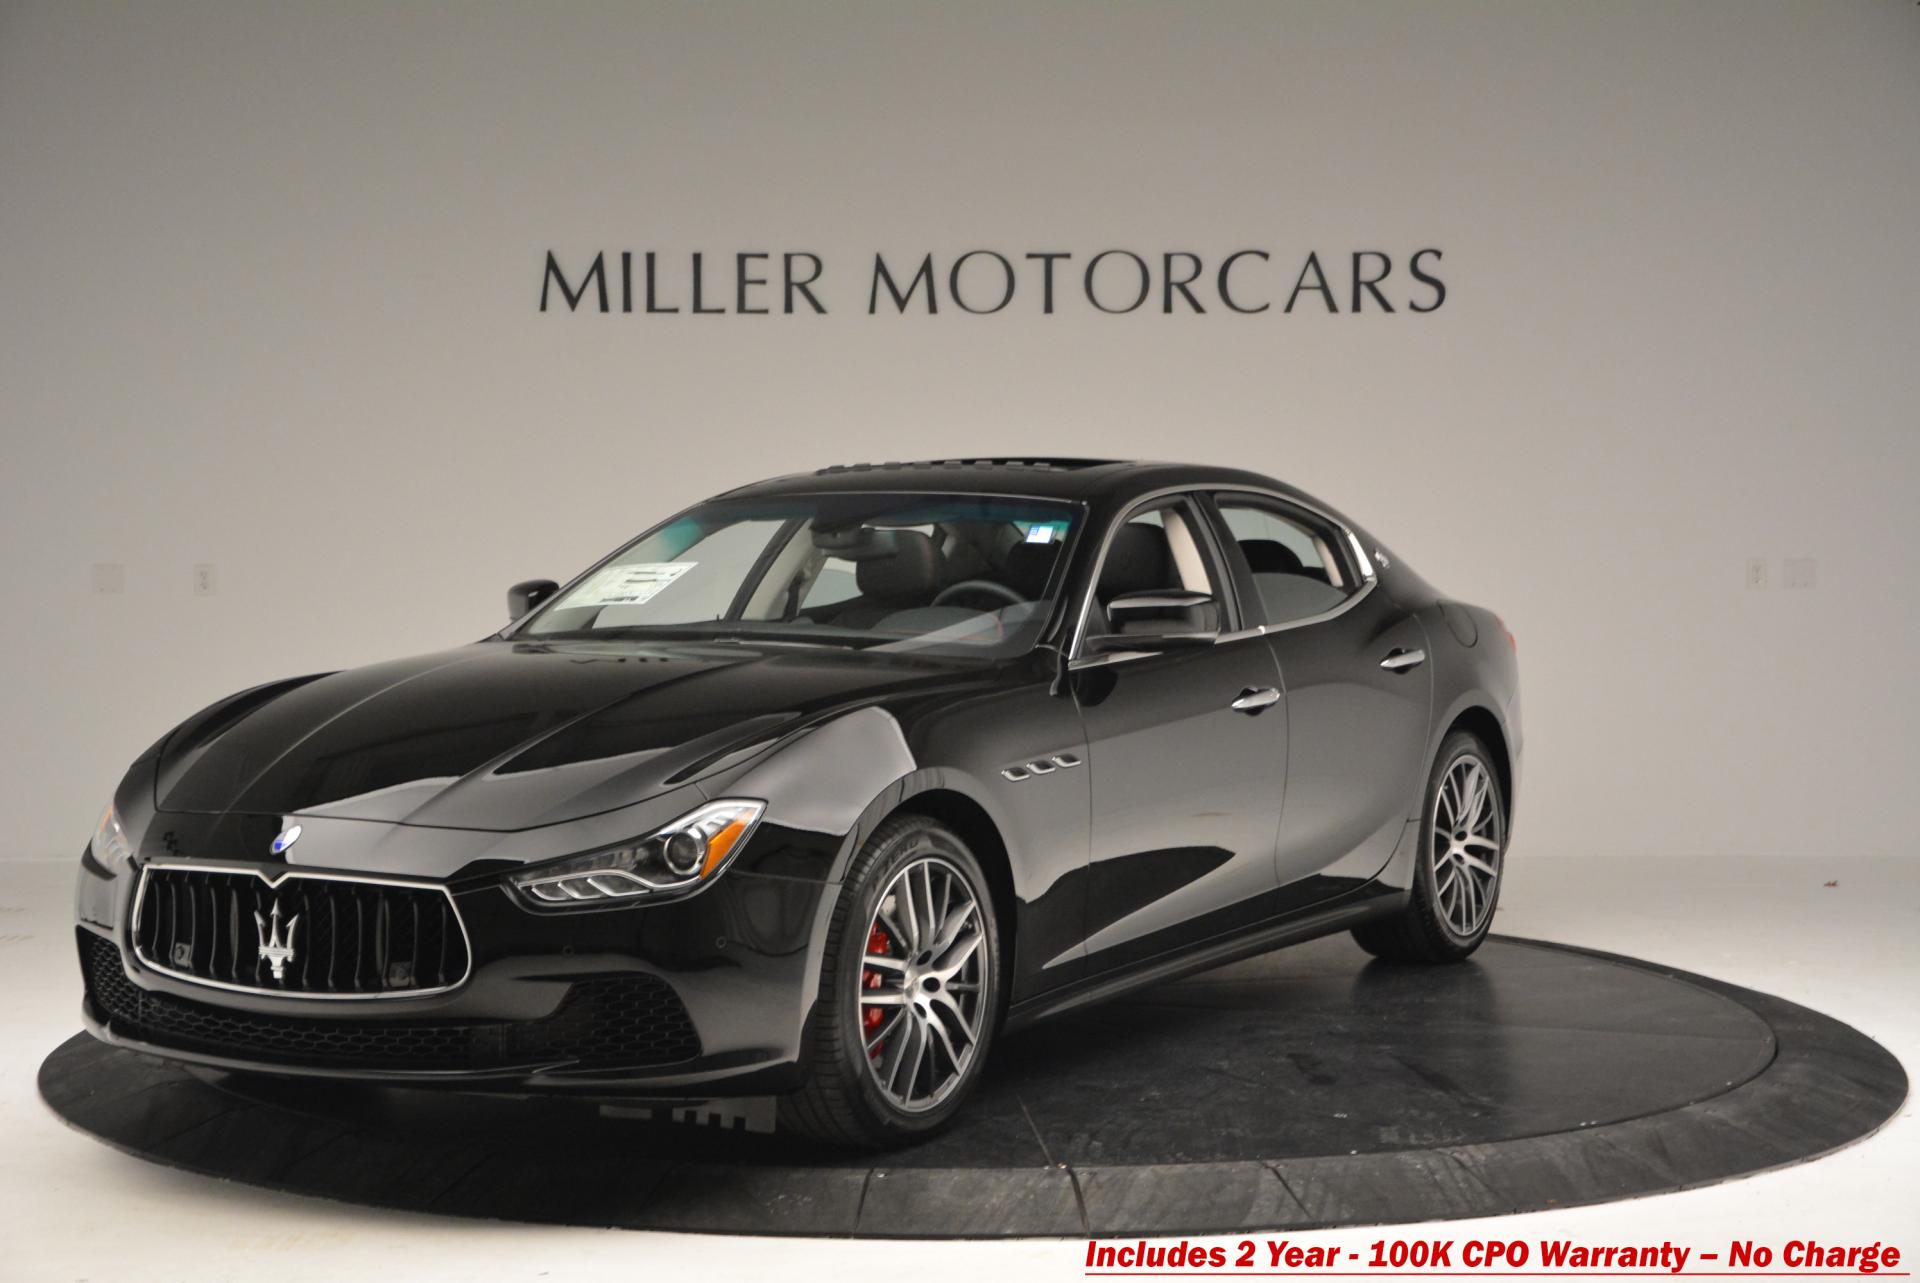 Used 2016 Maserati Ghibli S Q4 for sale Sold at Aston Martin of Greenwich in Greenwich CT 06830 1